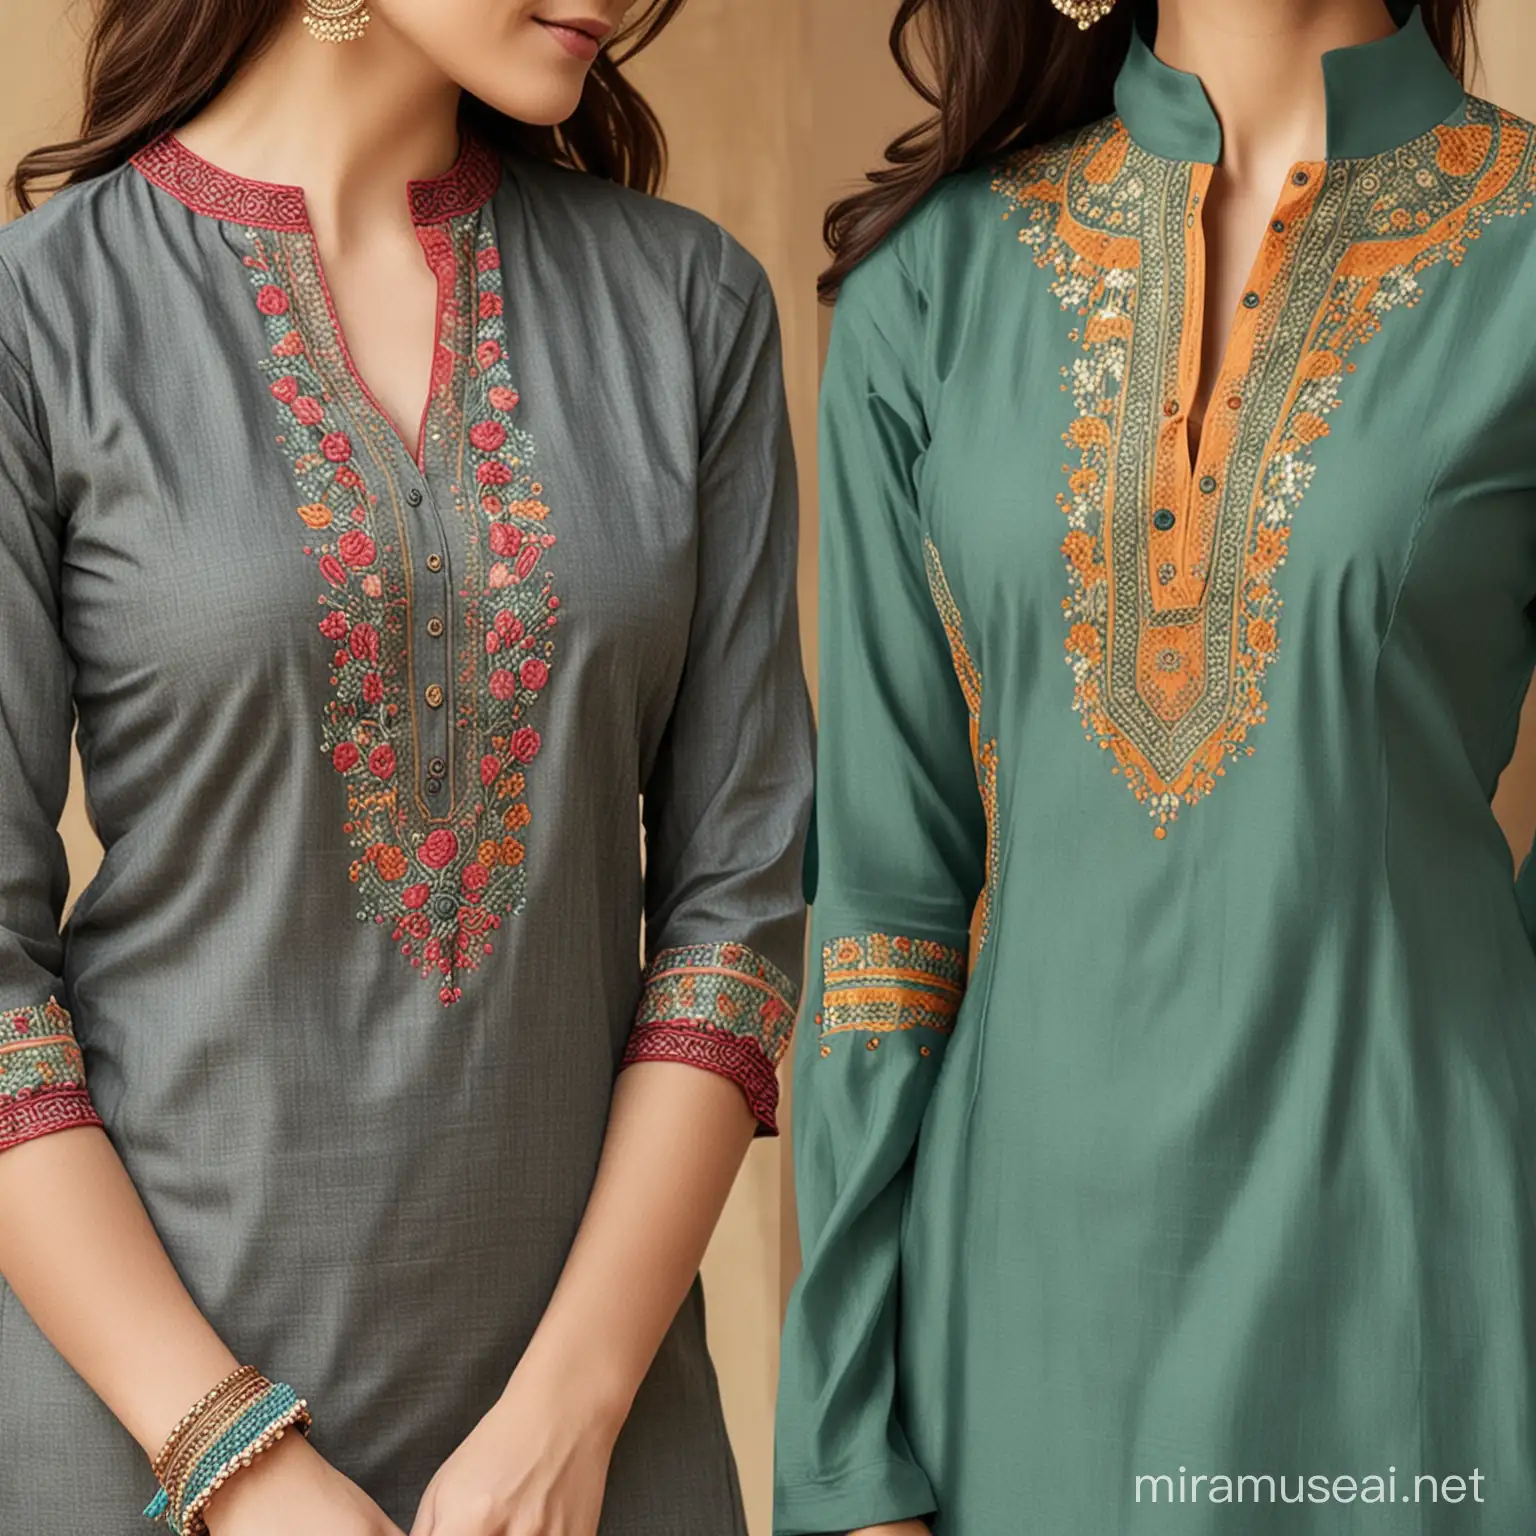 Variety of Kurti Neck Designs for Fashion Enthusiasts